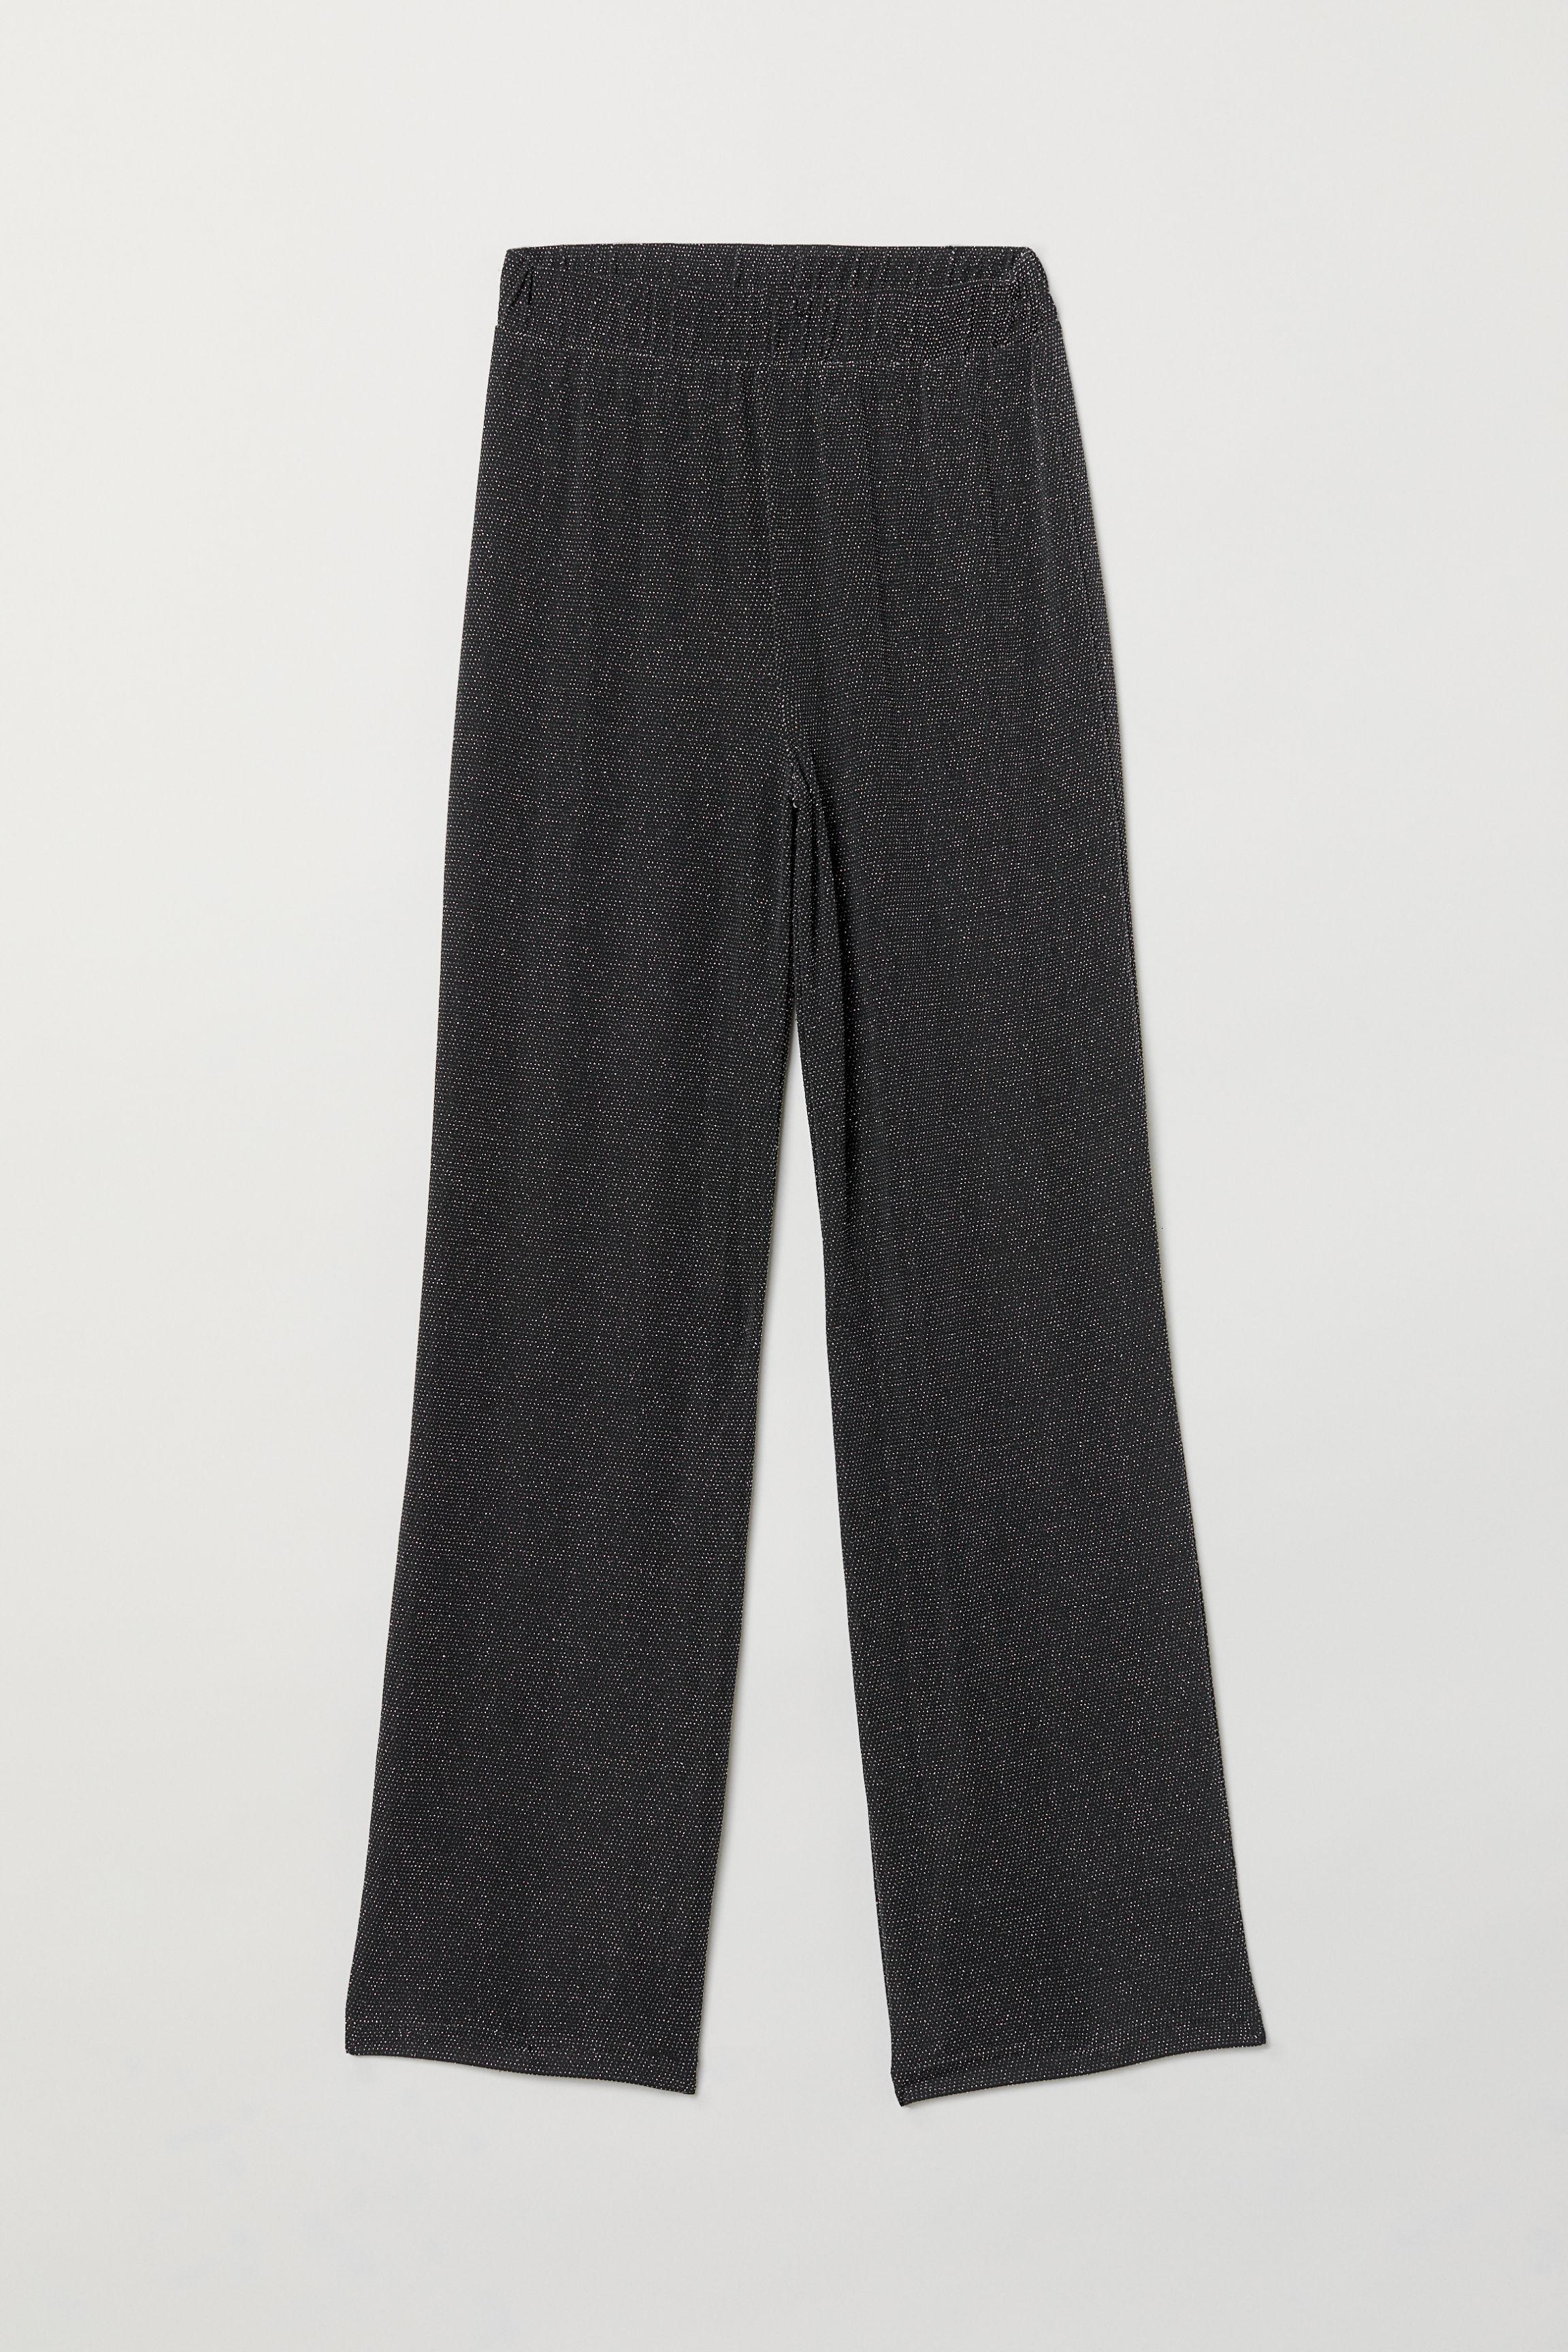 H&M Synthetic Wide-cut Pull-on Pants in Black - Lyst